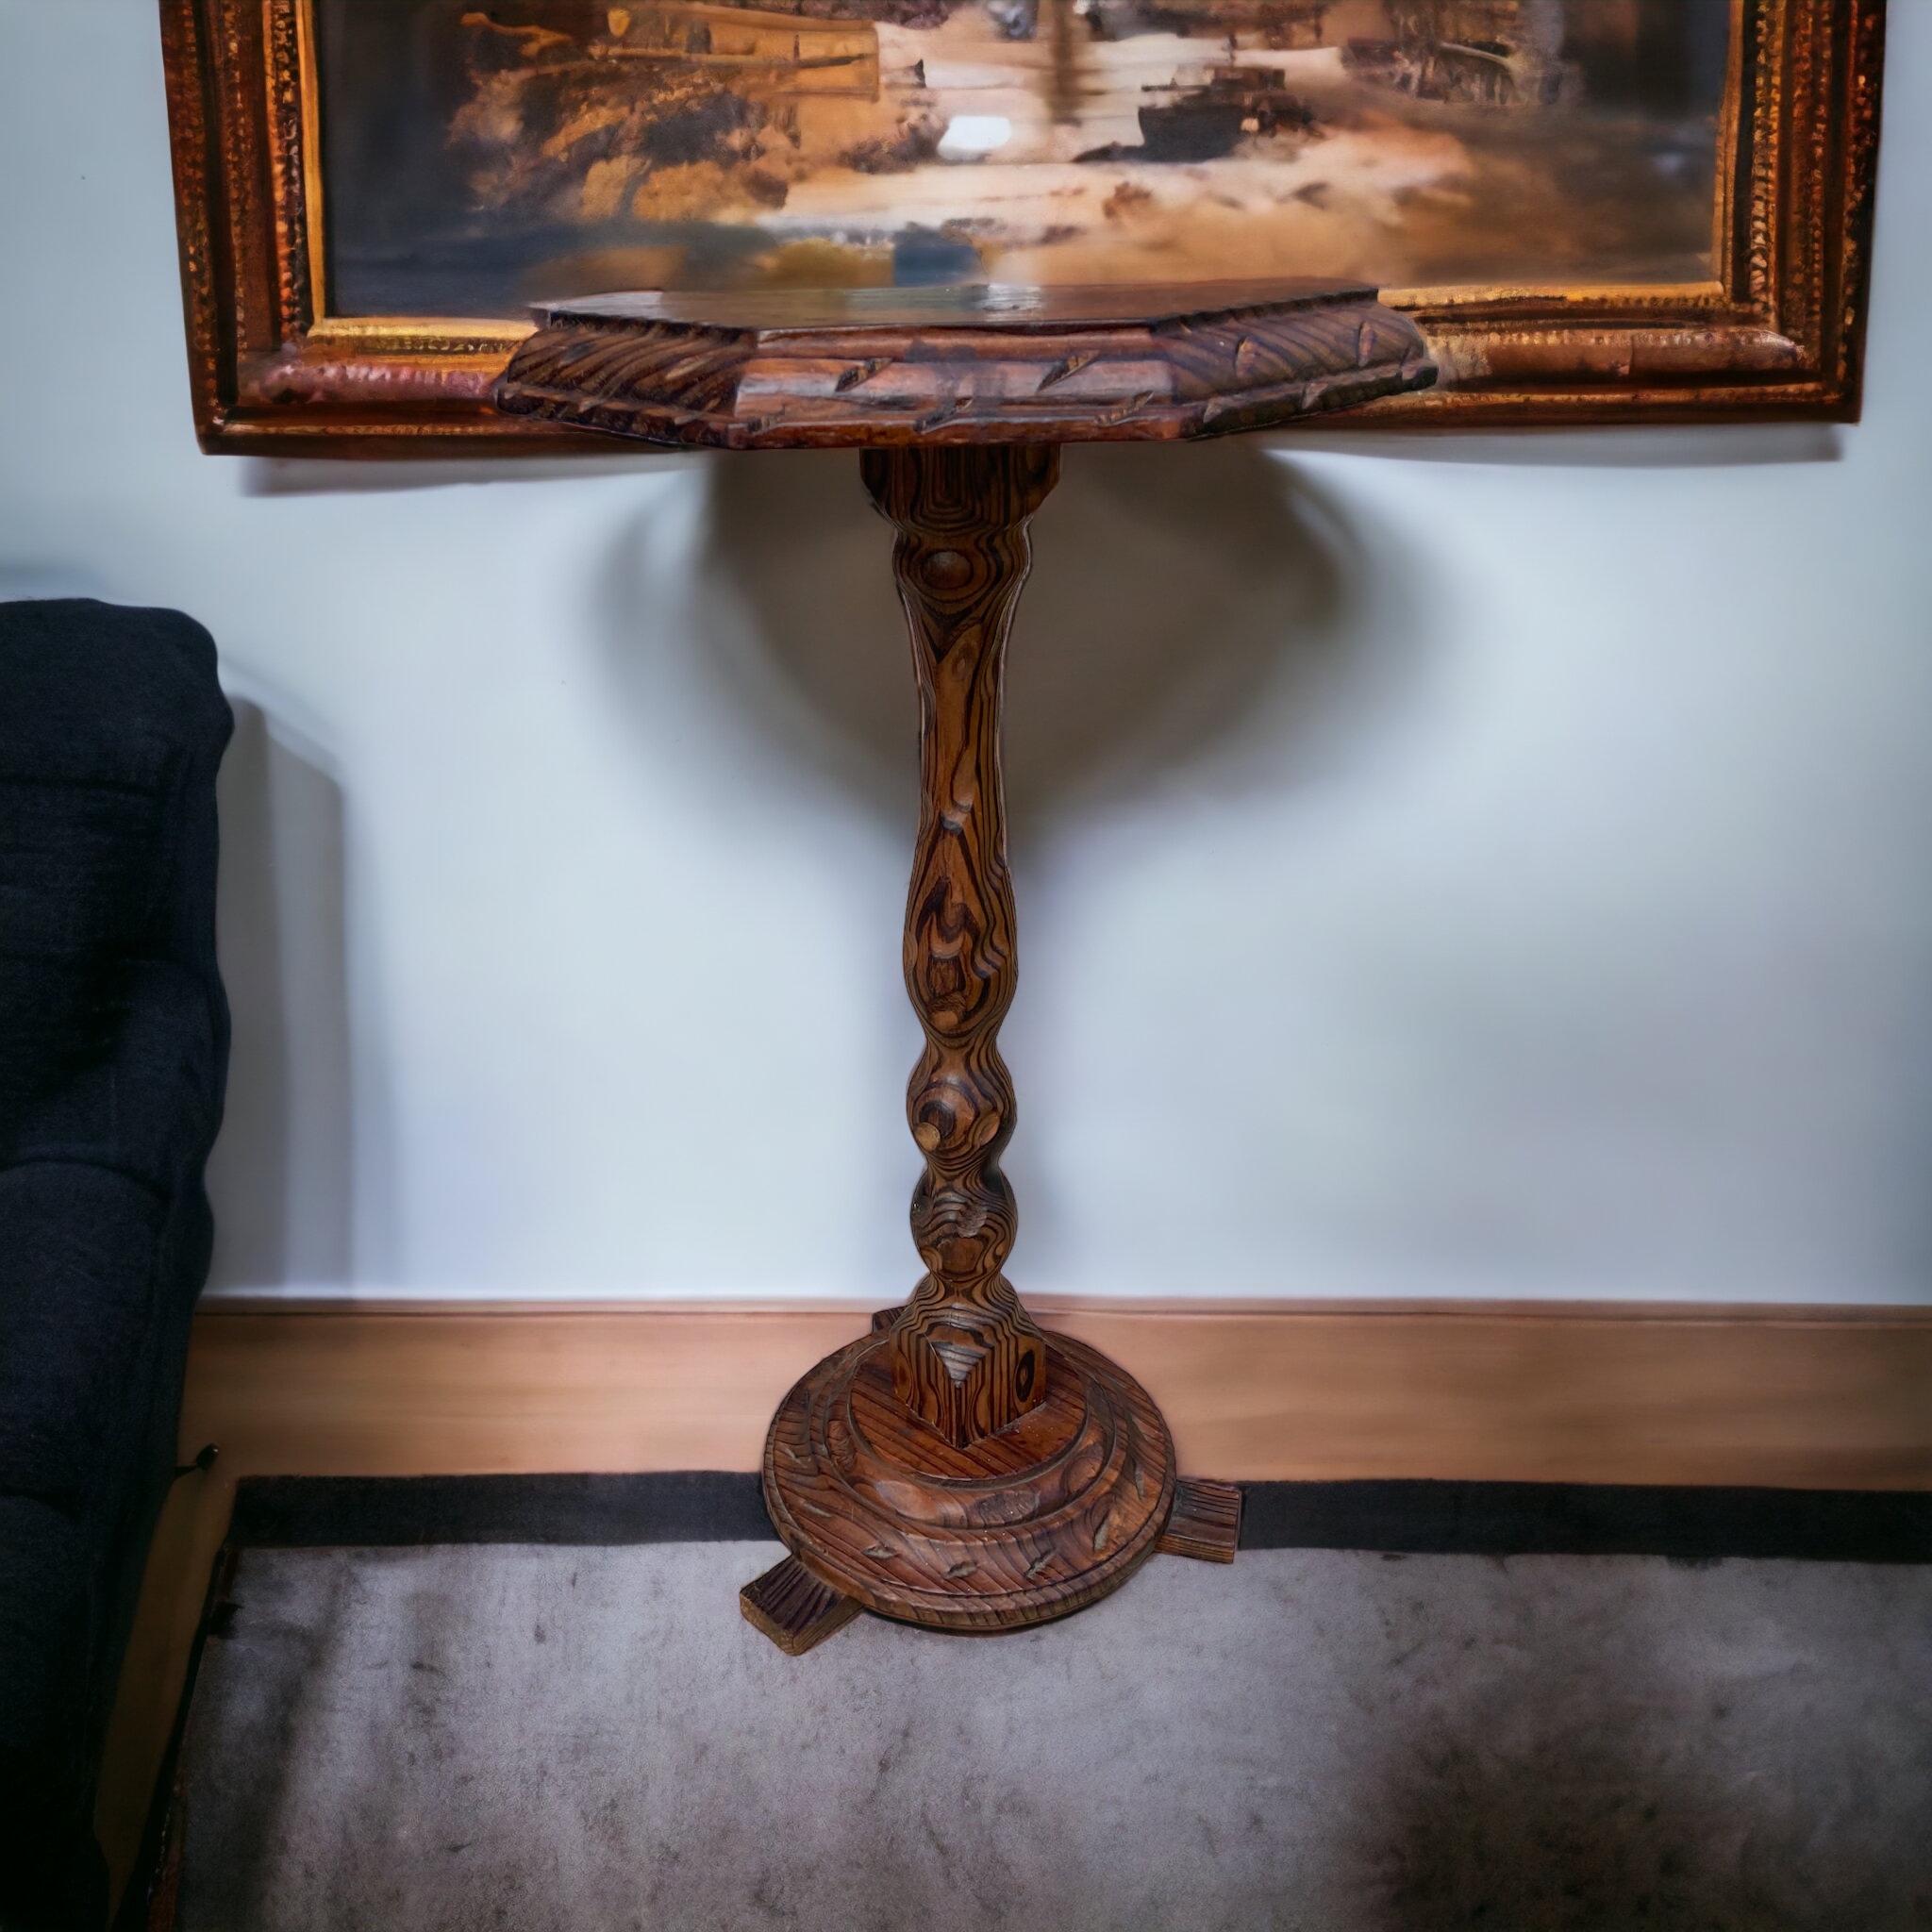 Ornate Pine Jardinere or Wine Glass Table. Stained Dark Oak, carved removeable screw top on a beautiful turned stem on tri feet. Wonderful grain on wood to give real charm and character.

H: 62 cm

W: 33 cm